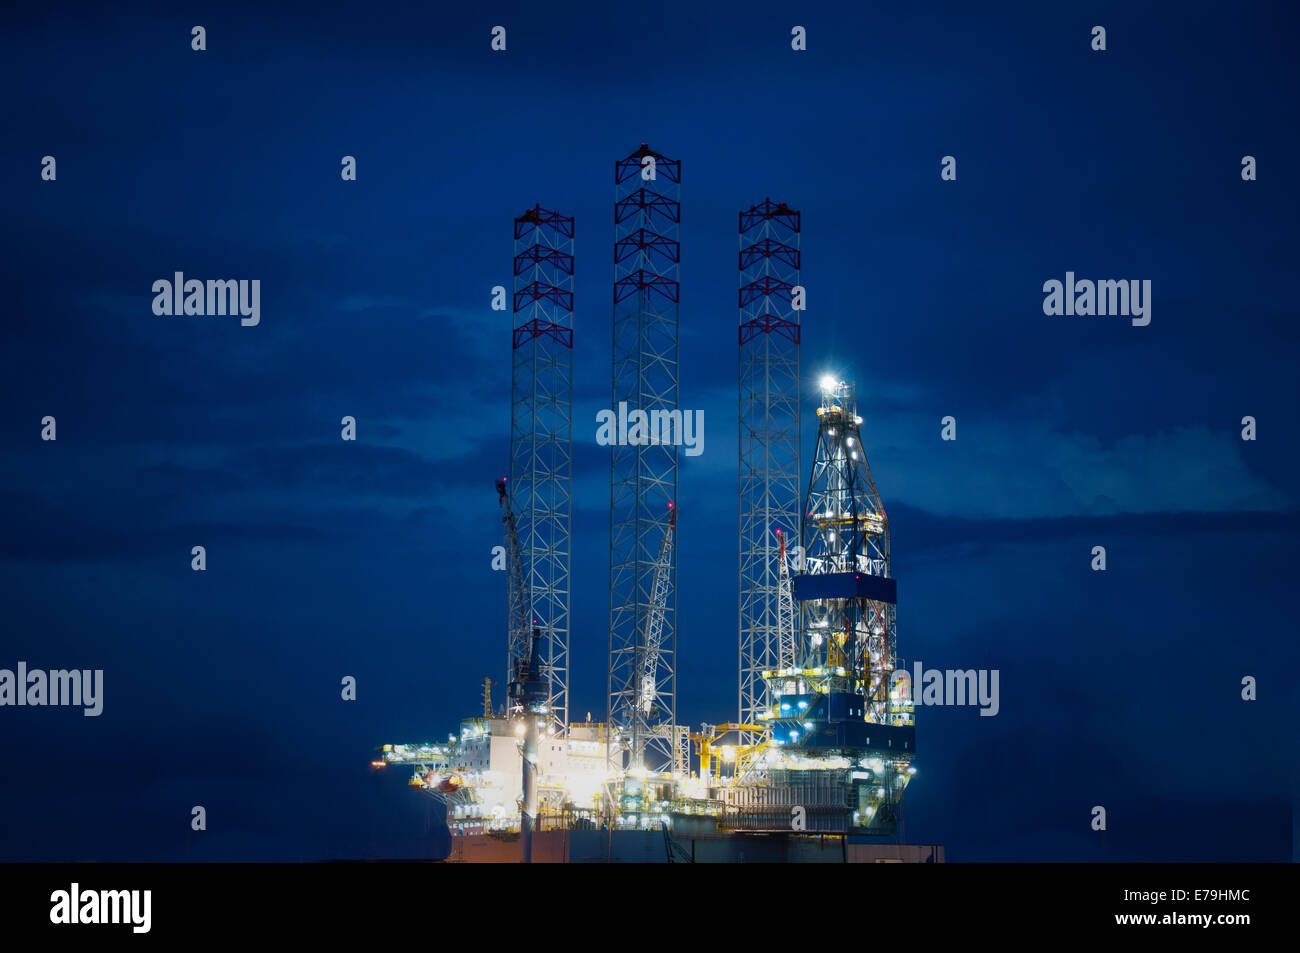 Oil rig at sea in night Stock Photo